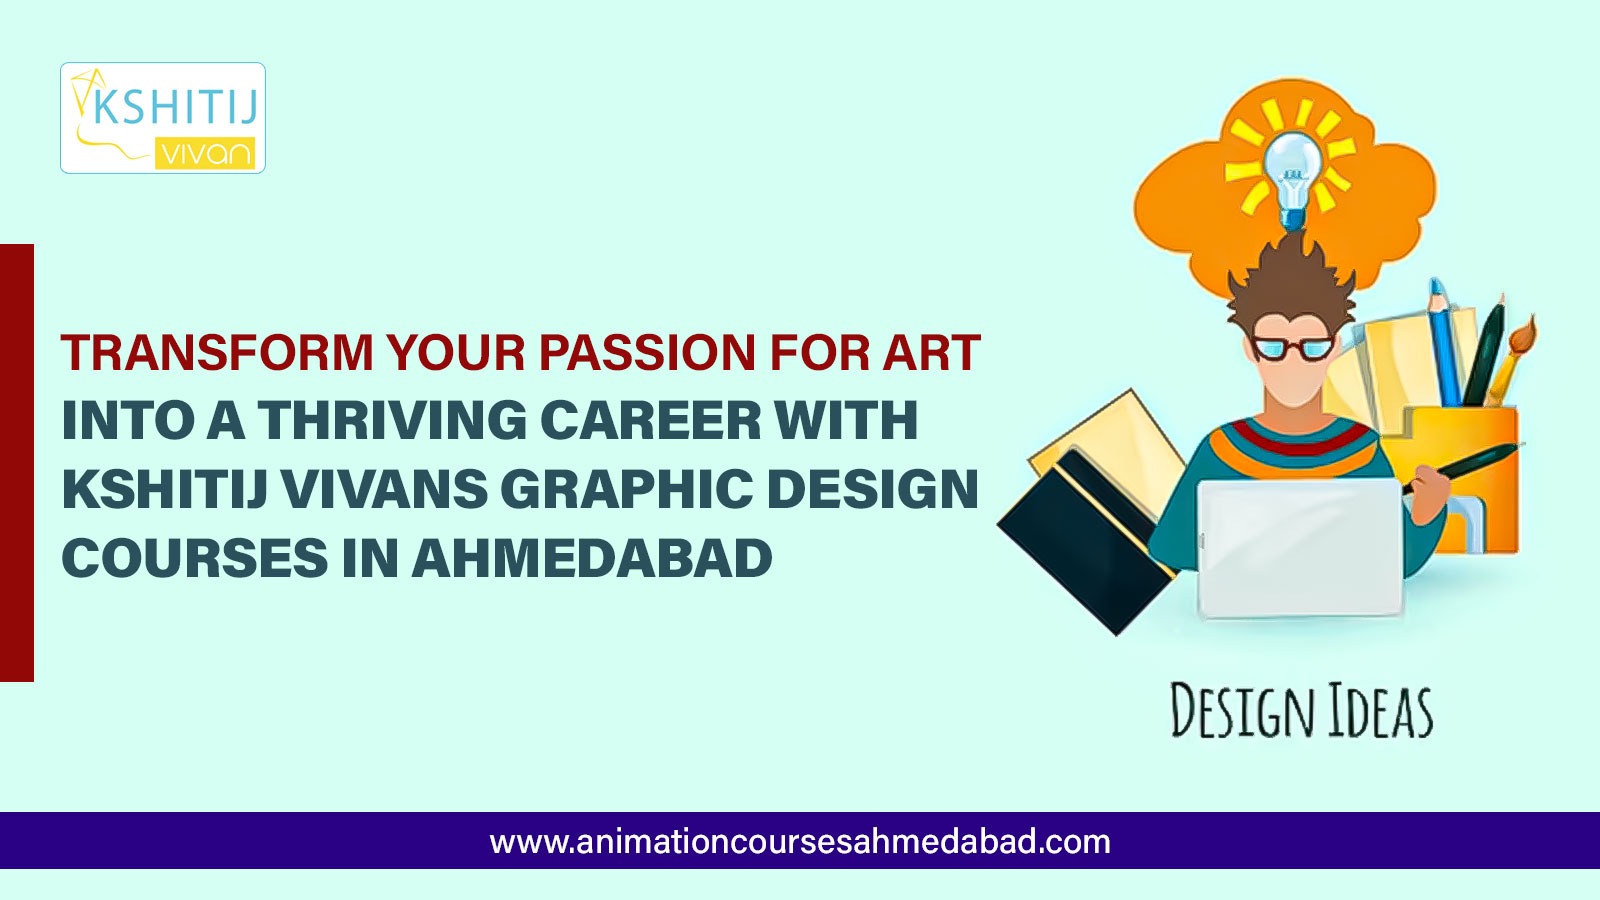 Transform your passion for art into a thriving career with Kshitij Vivans graphic design courses in Ahmedabad.